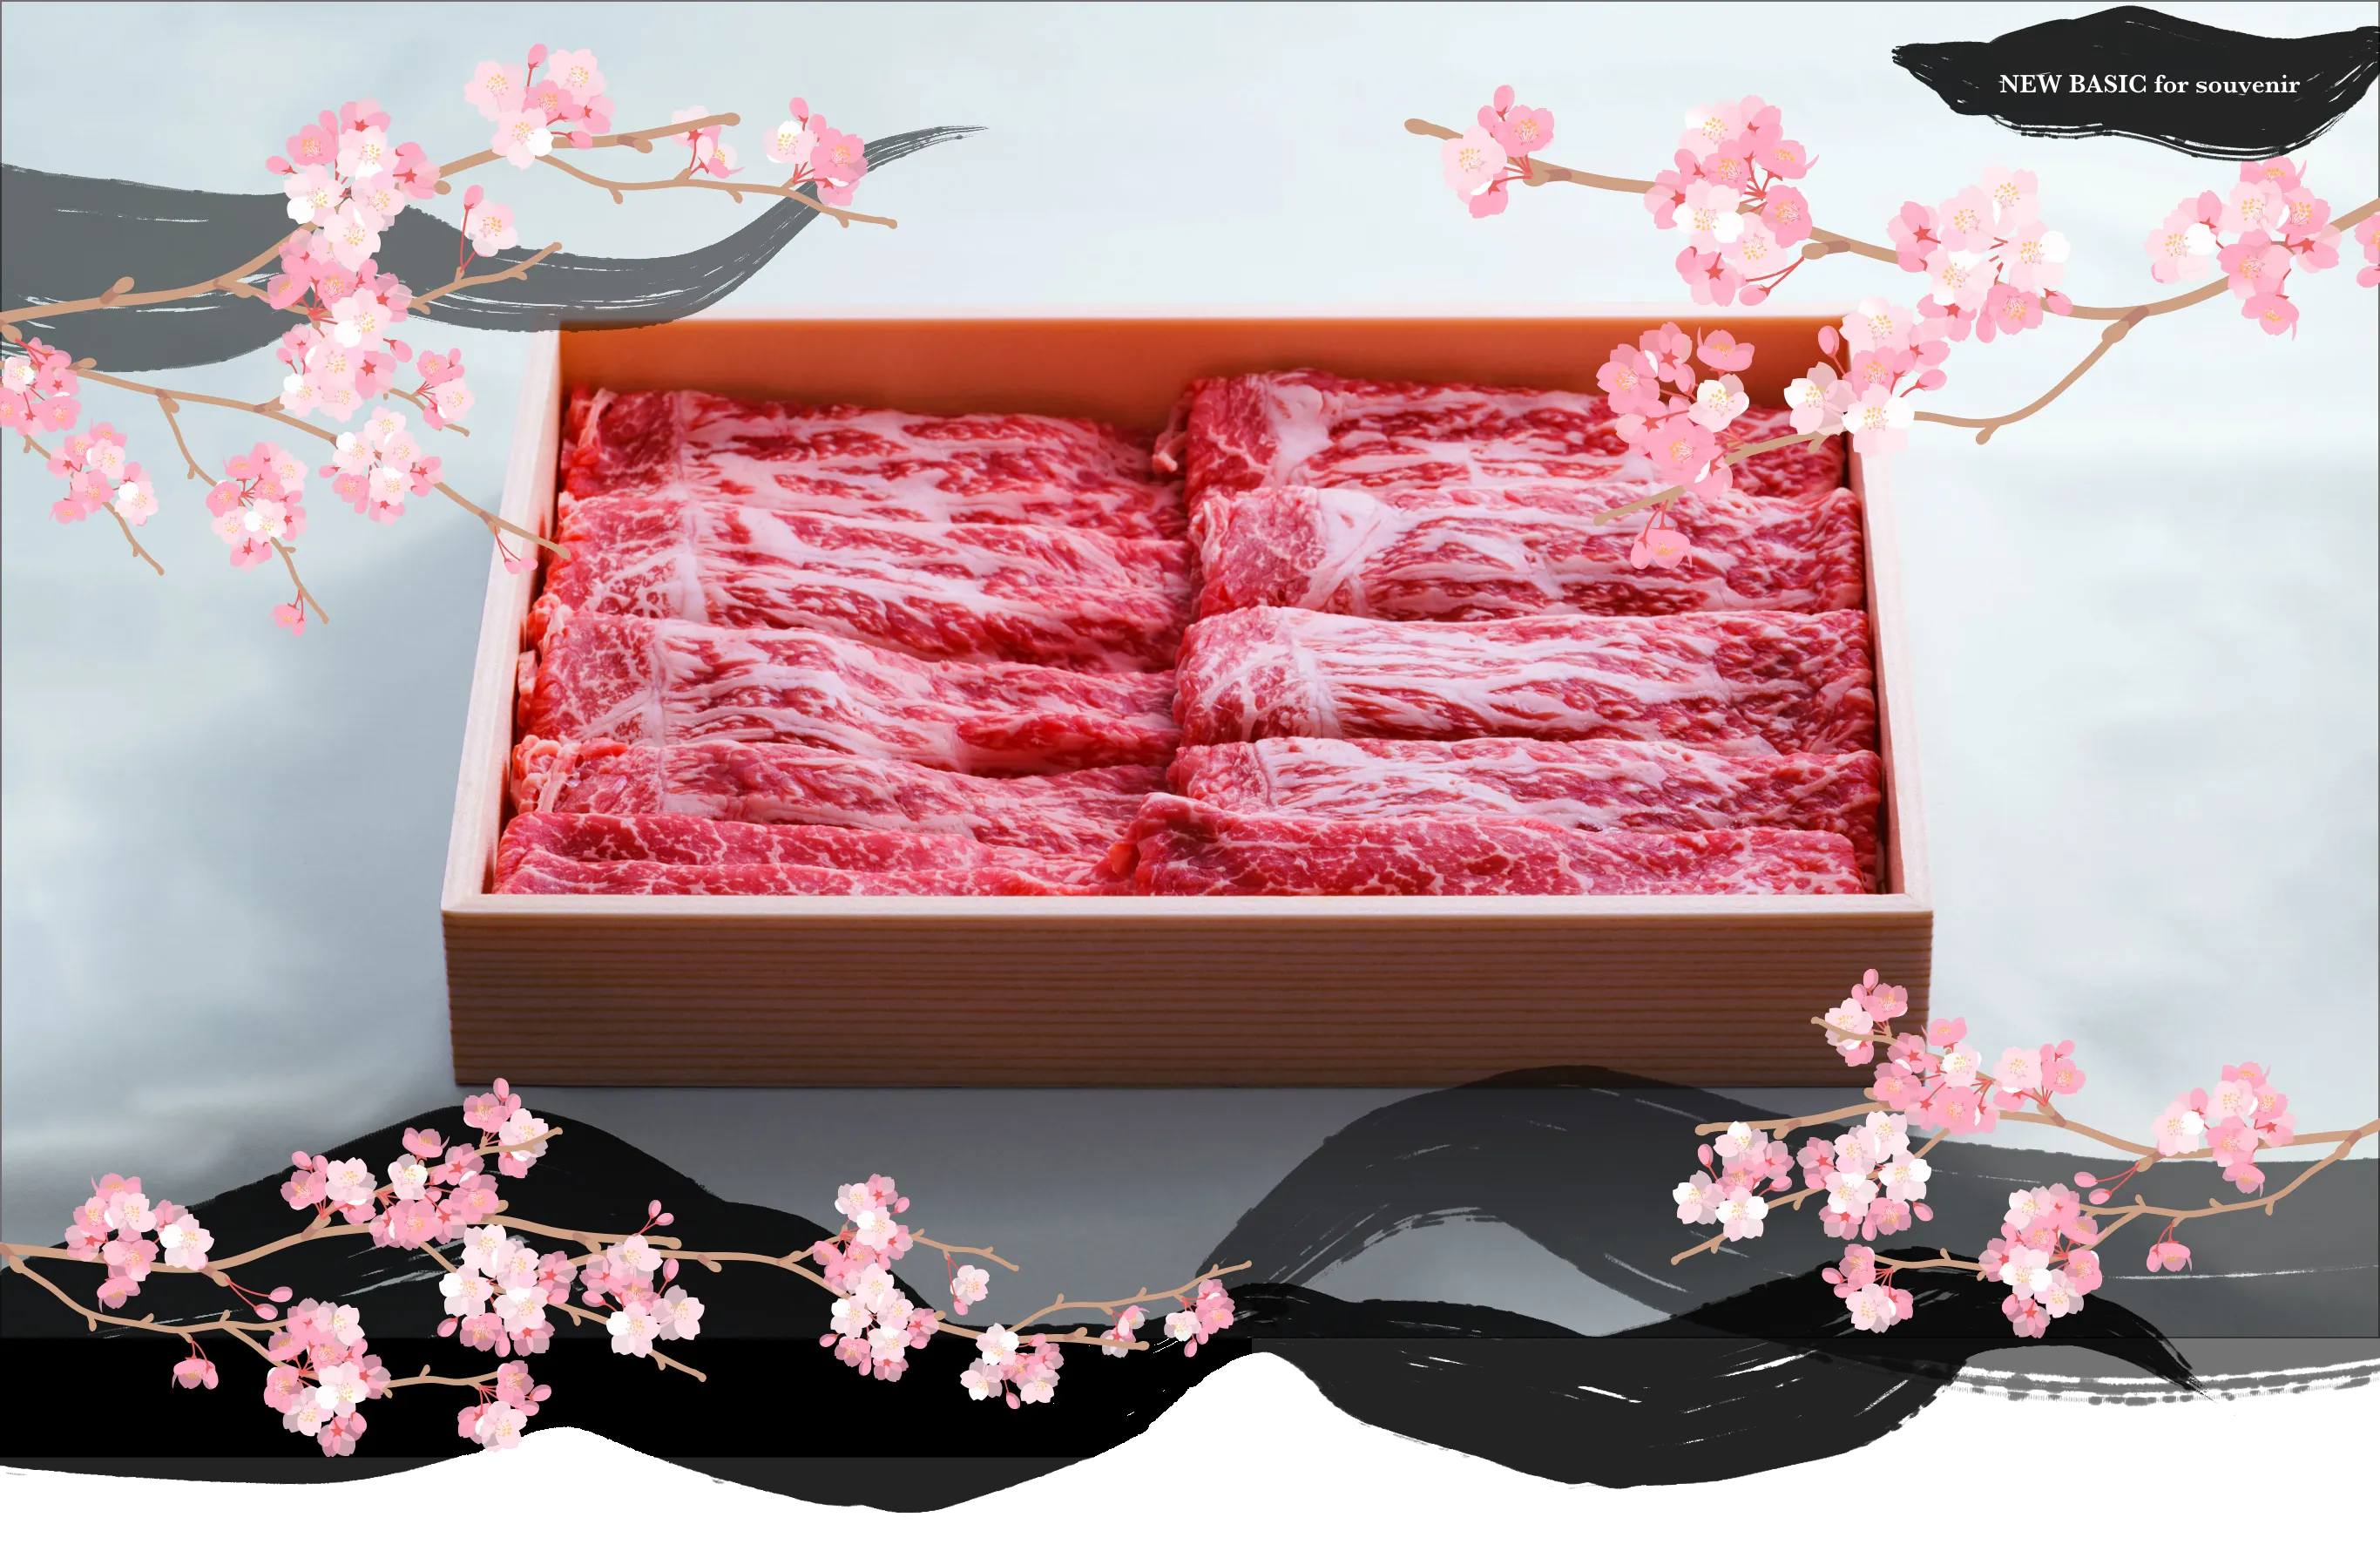 Japanese Wagyu Beef for souvenir!